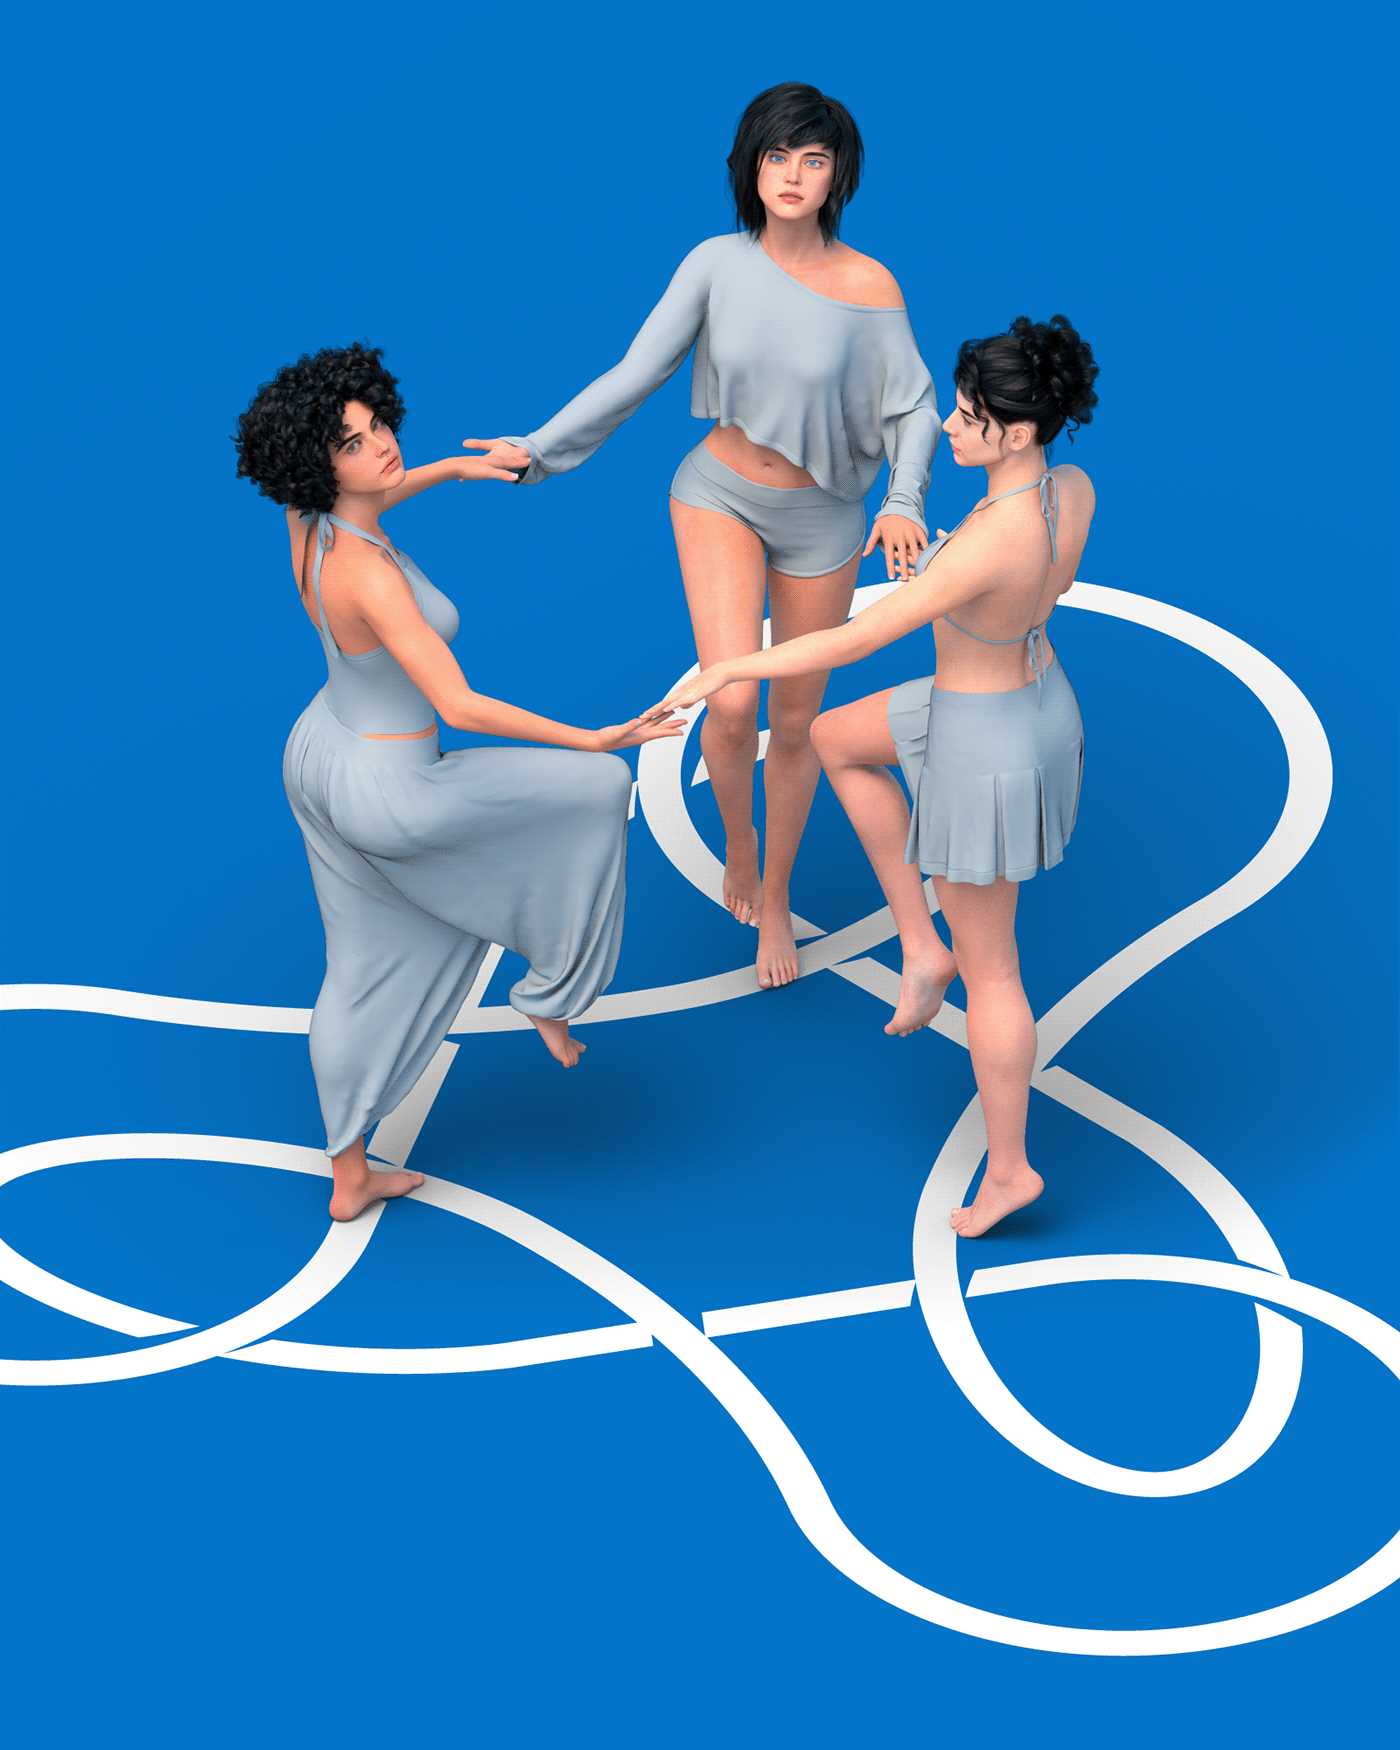 Three models dancing on a floor that features the dynamic aspect of the "Interlinked" logo.